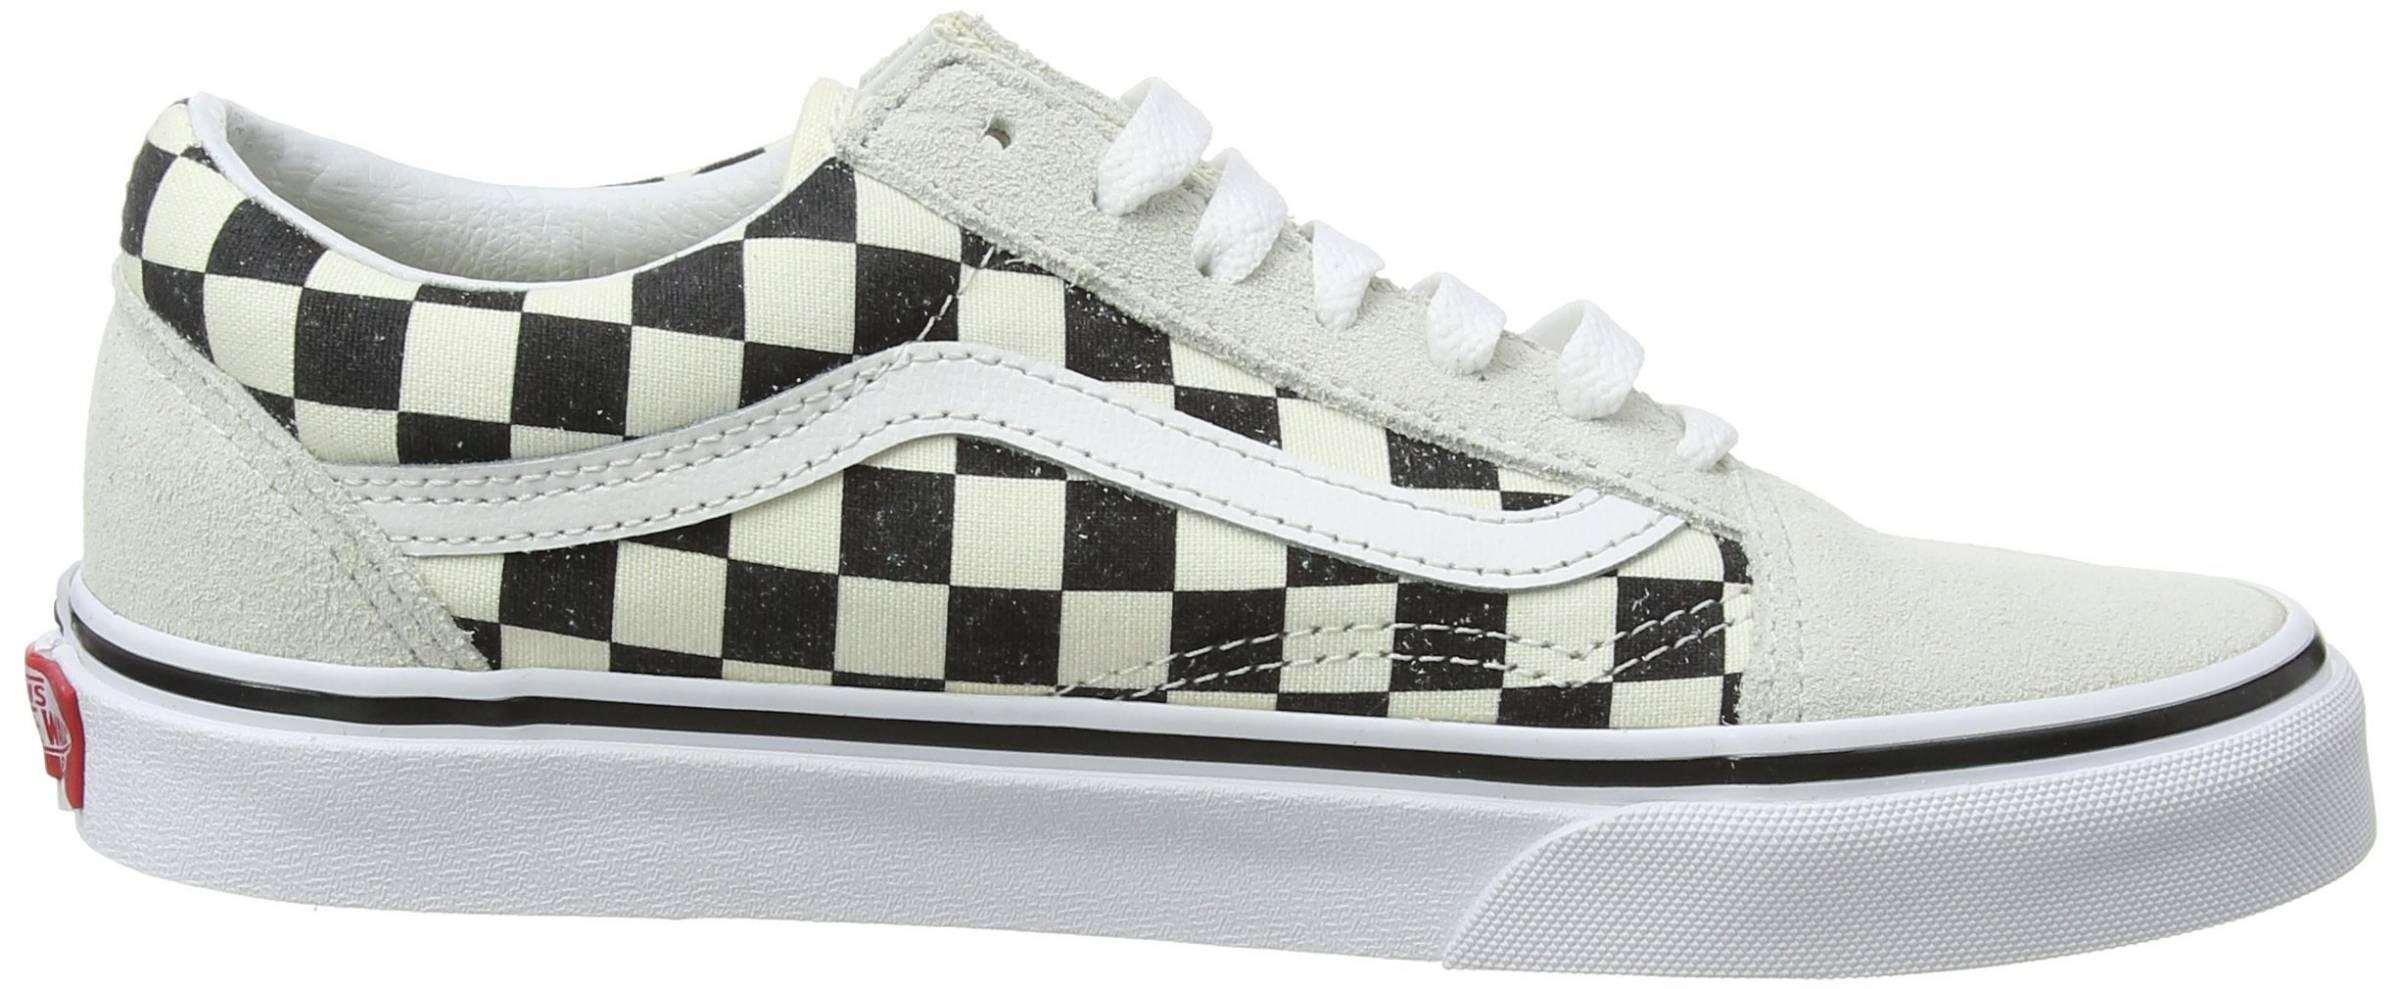 vans checkerboard white and black